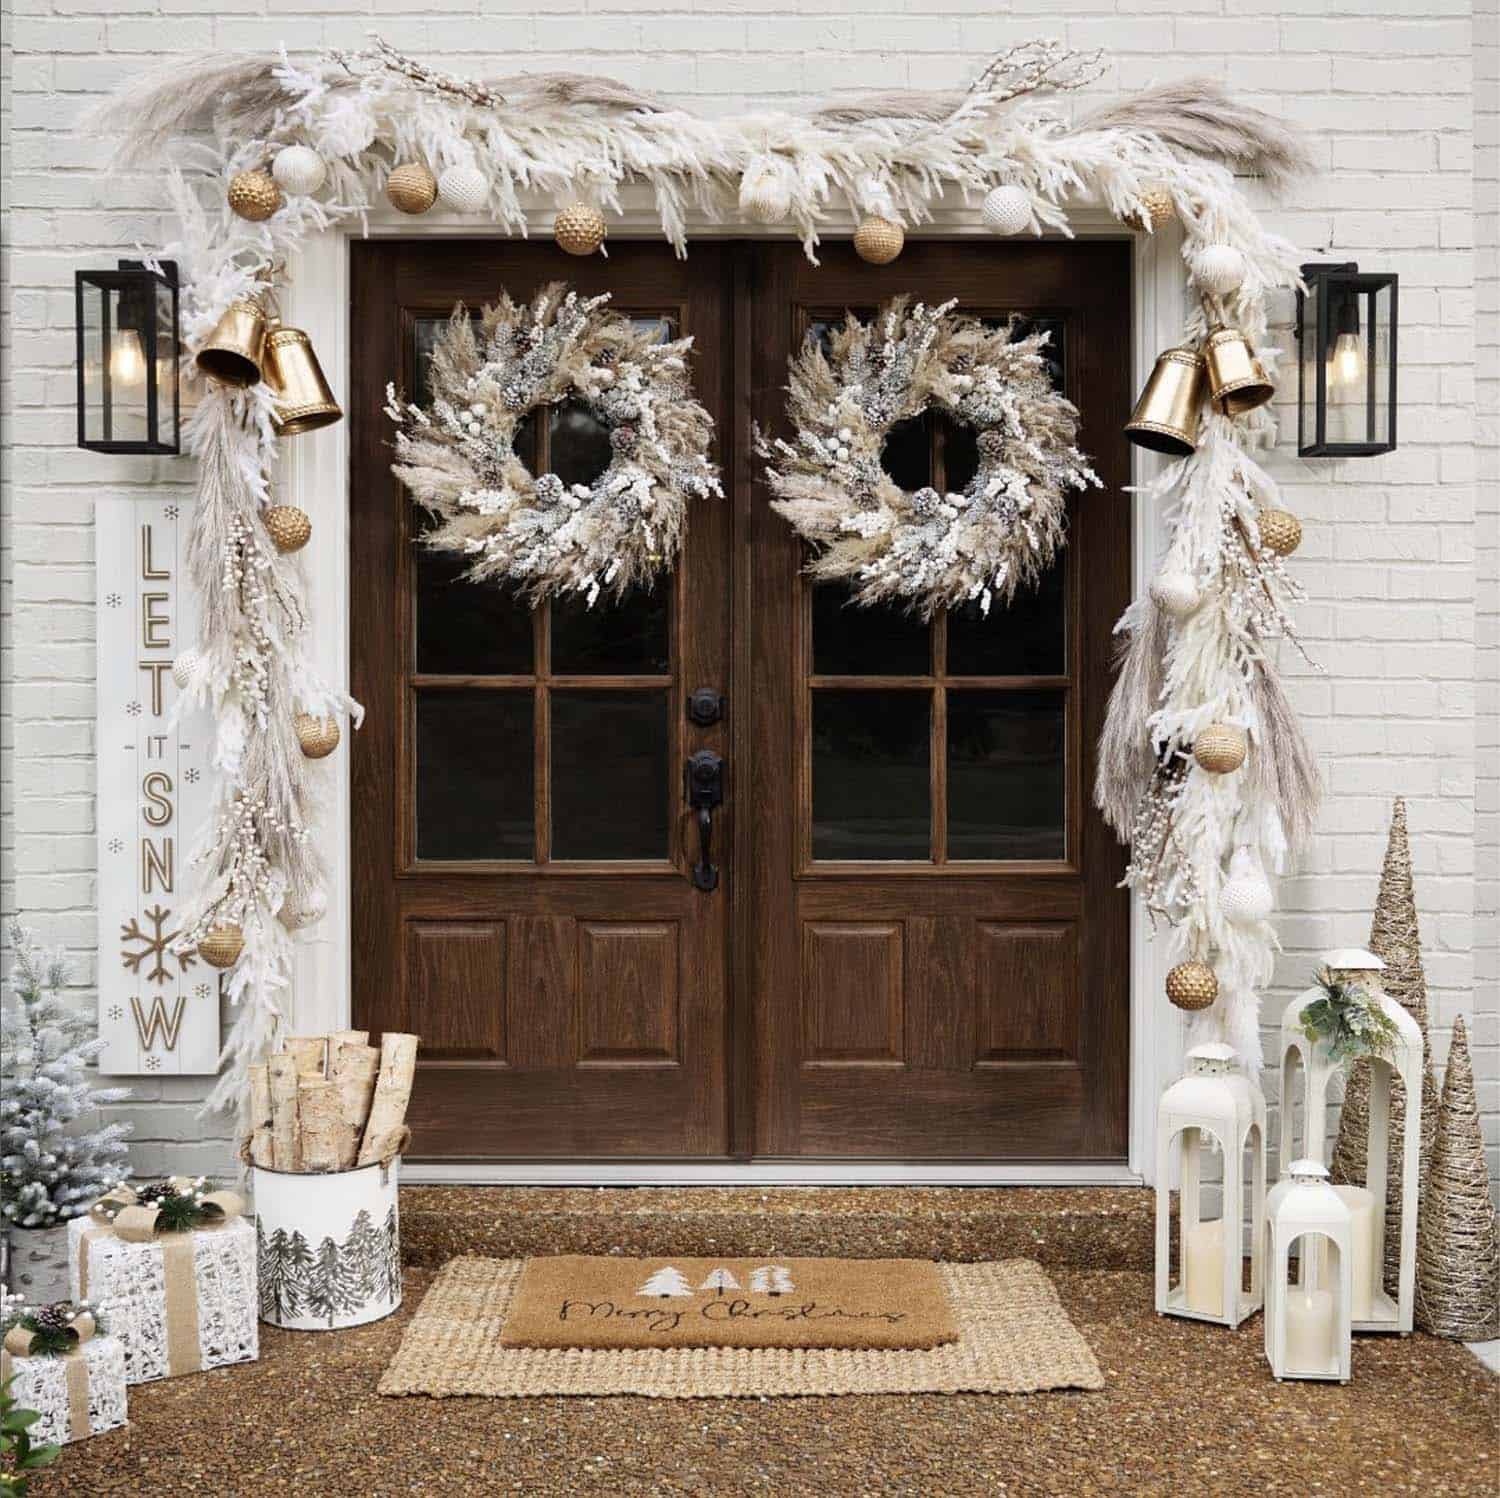 25 White Christmas Decorating Ideas To Make Your Home Sparkle